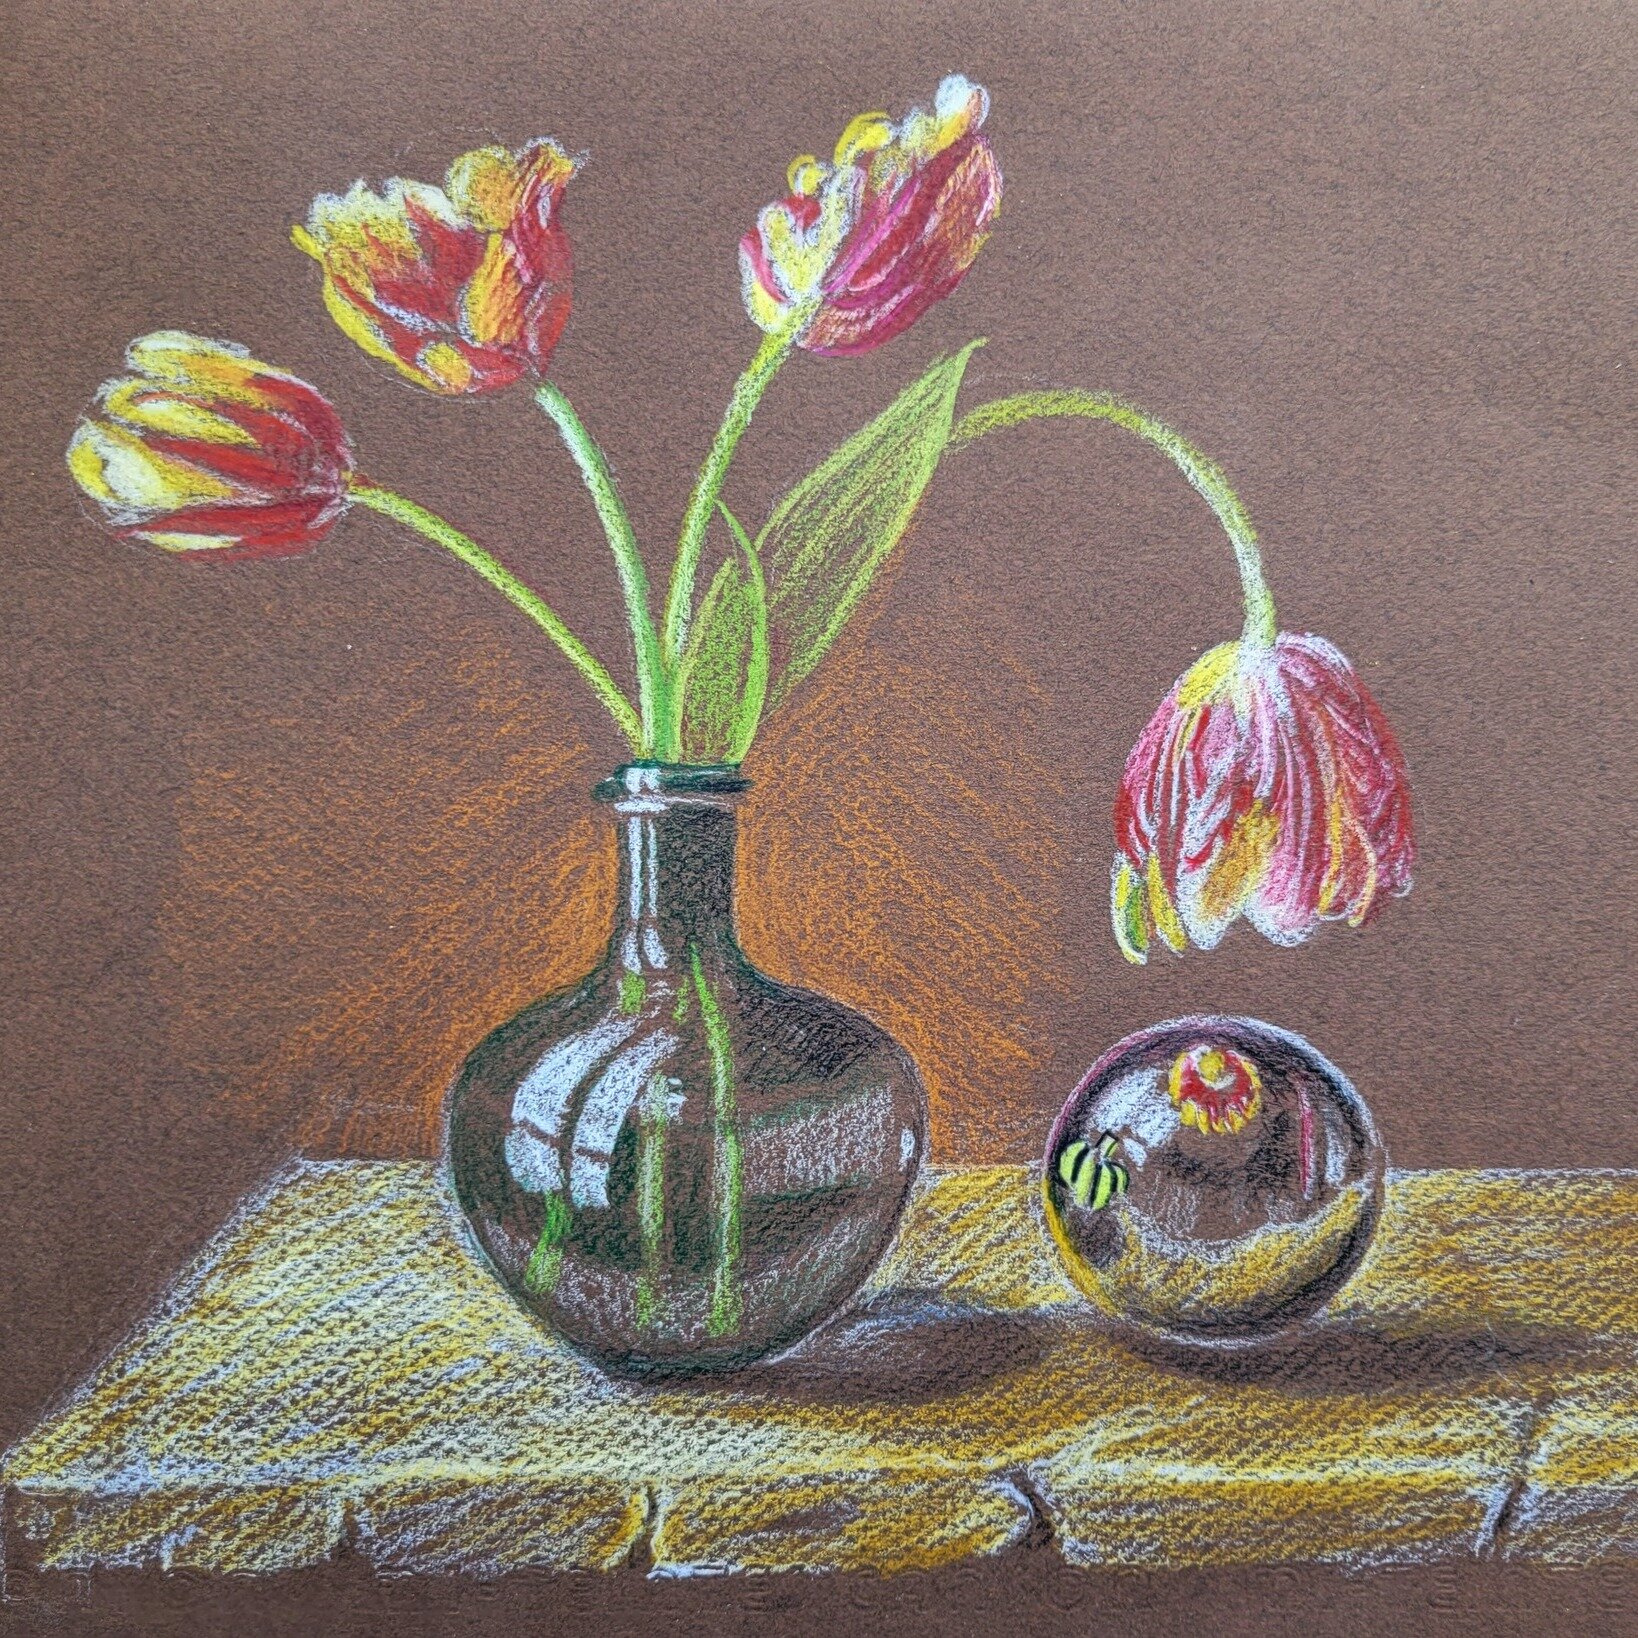 My still-life drawing for my colored pencil drawing class. All my students aced it! They are a talented group. #coredpencildrawing #stilllifedrawing #tulips #drawingreflections #coloredpencilinstruction #drawinginstruction #chicagobotanicgarden #zoom